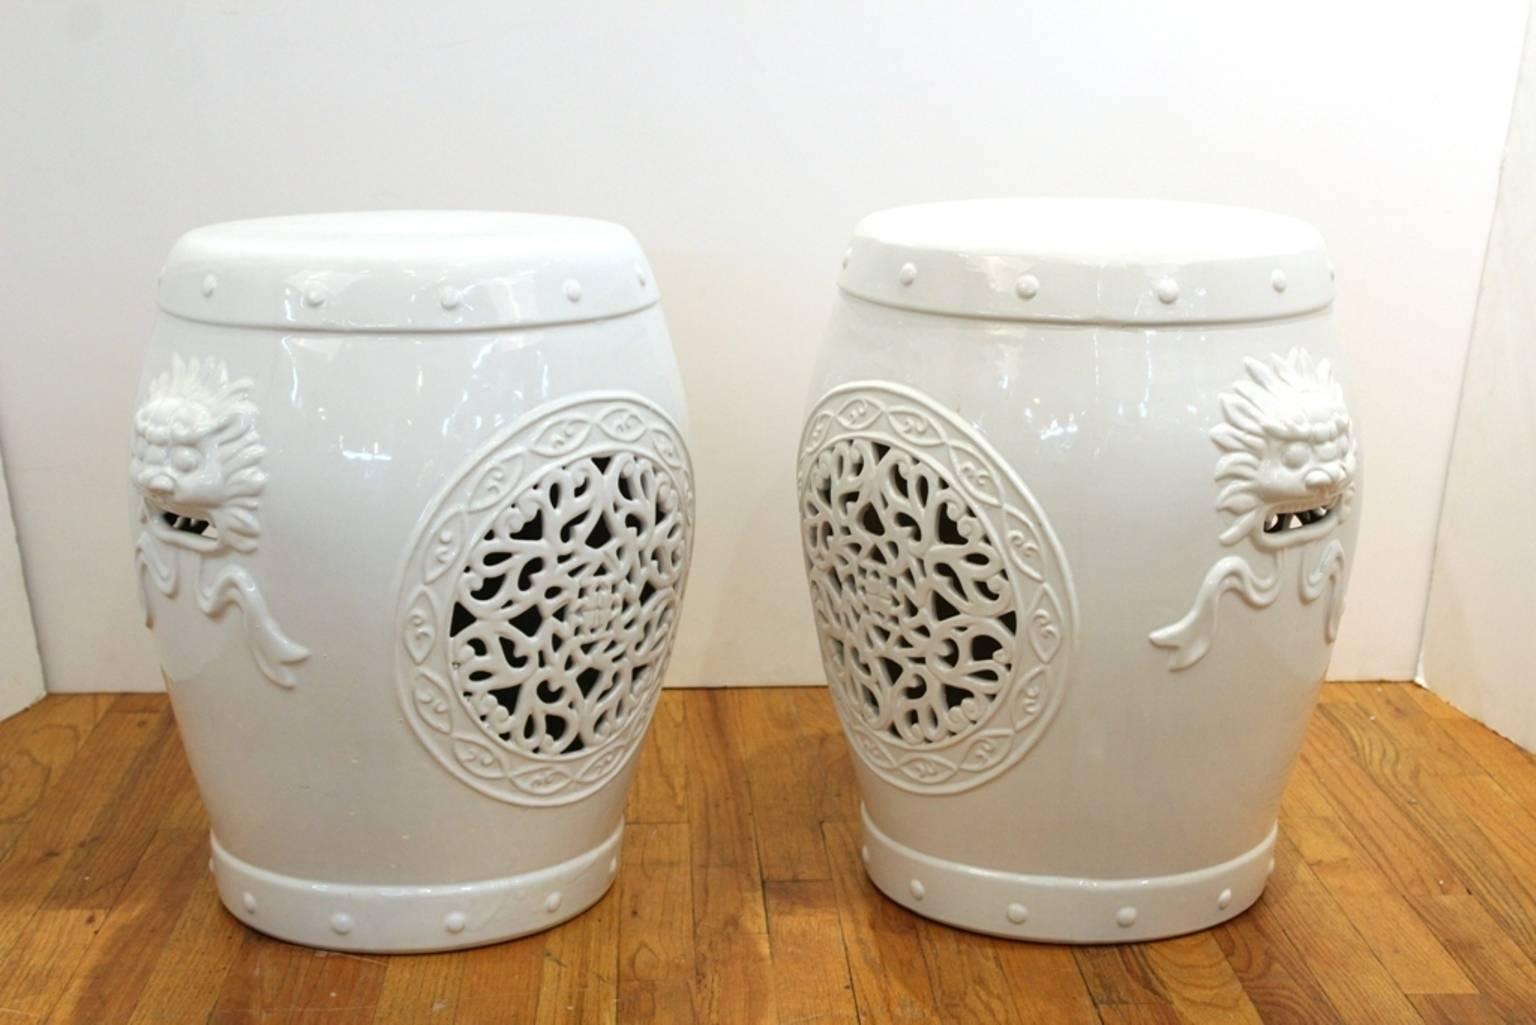 Garden stool in white glazed ceramic. Decorated with cut out patterns, medallions and lions similar to Asian motifs. Marked [GUMPS San Francisco] on the underside. Minor wear due to age and use but in overall good condition. Only a single stool is